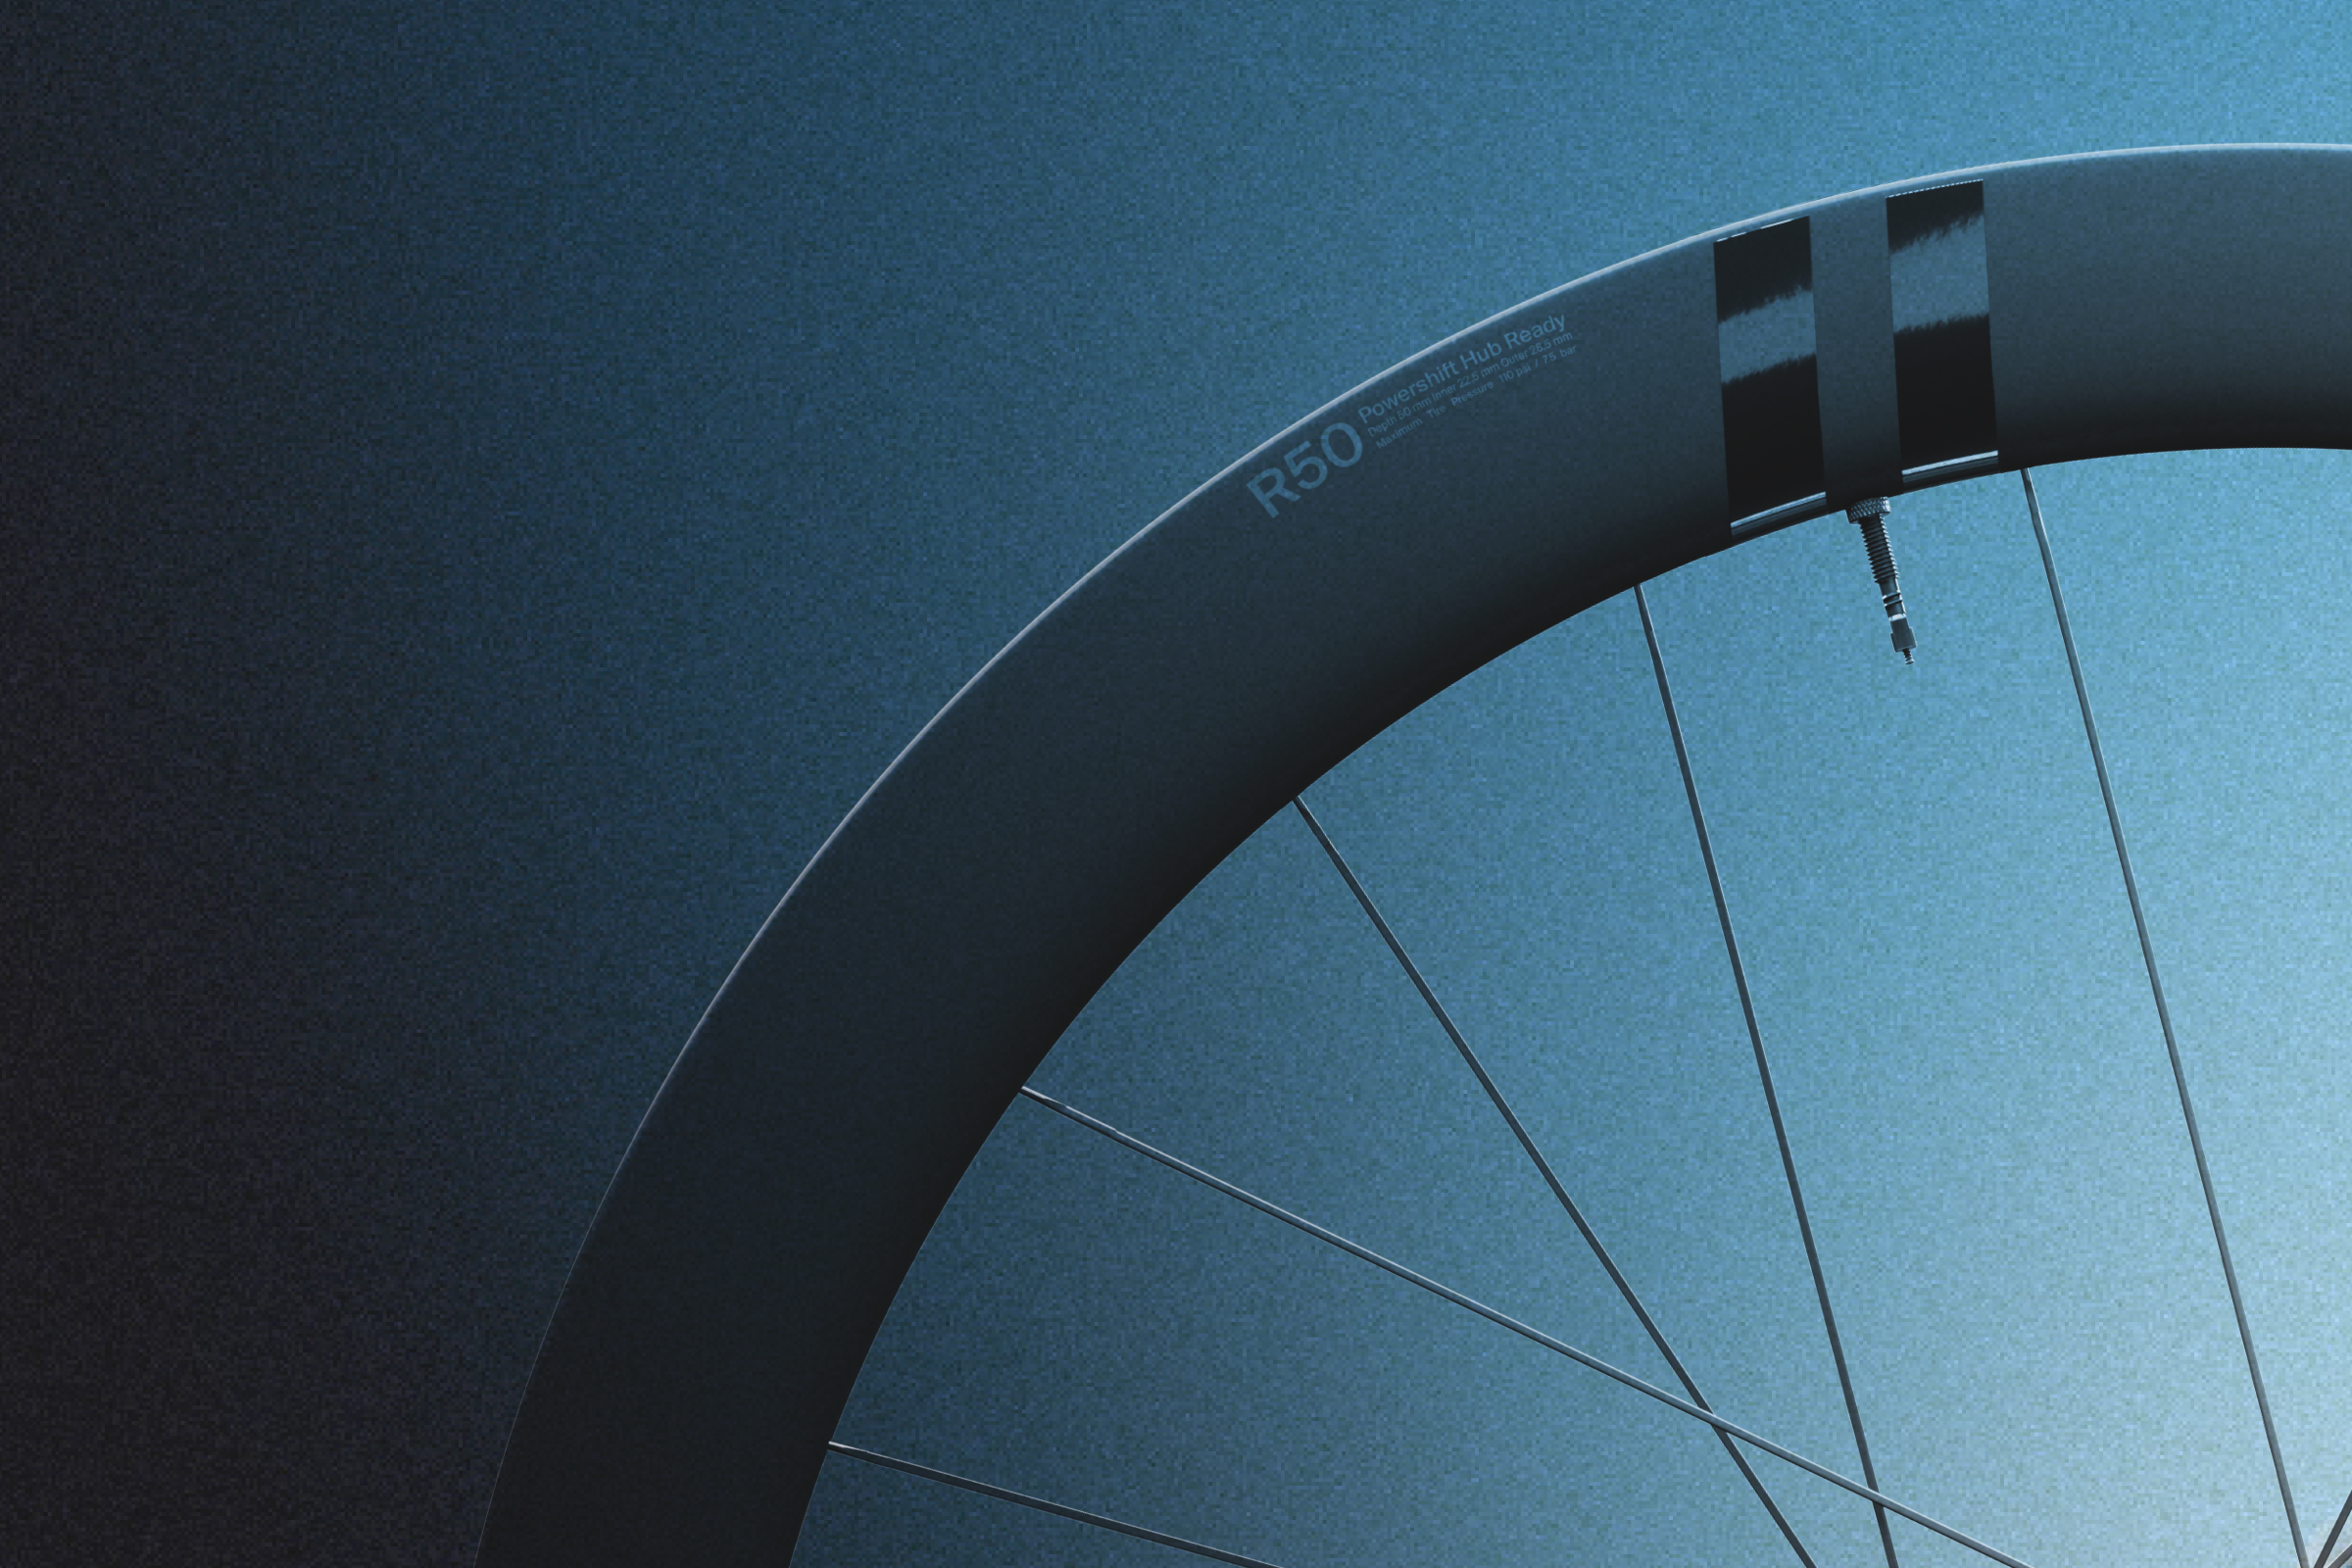 Introducing the R36, R50 and G42 Carbon Wheelsets